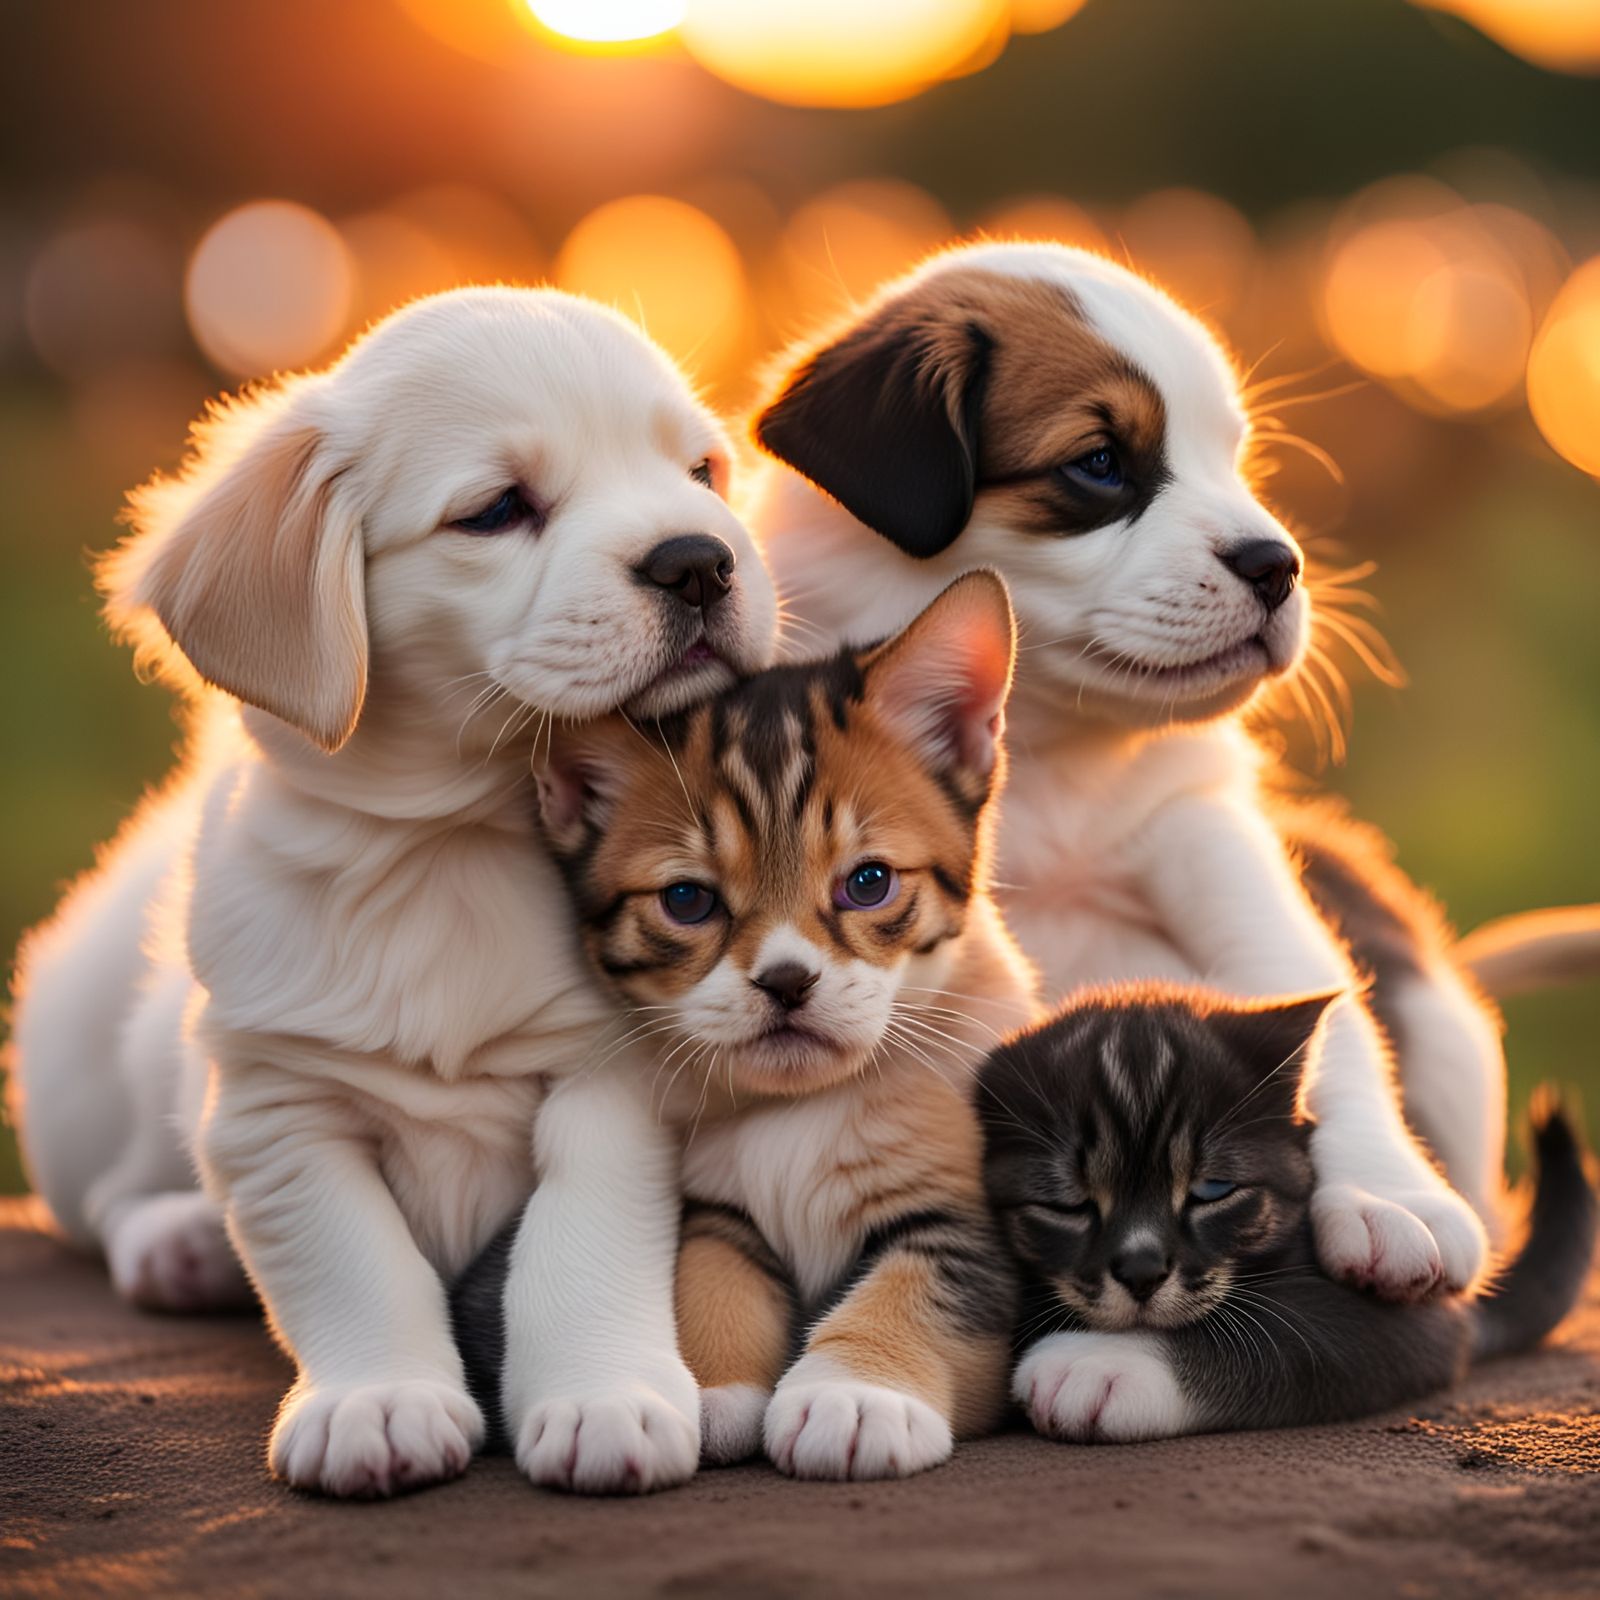  puppies and kittens